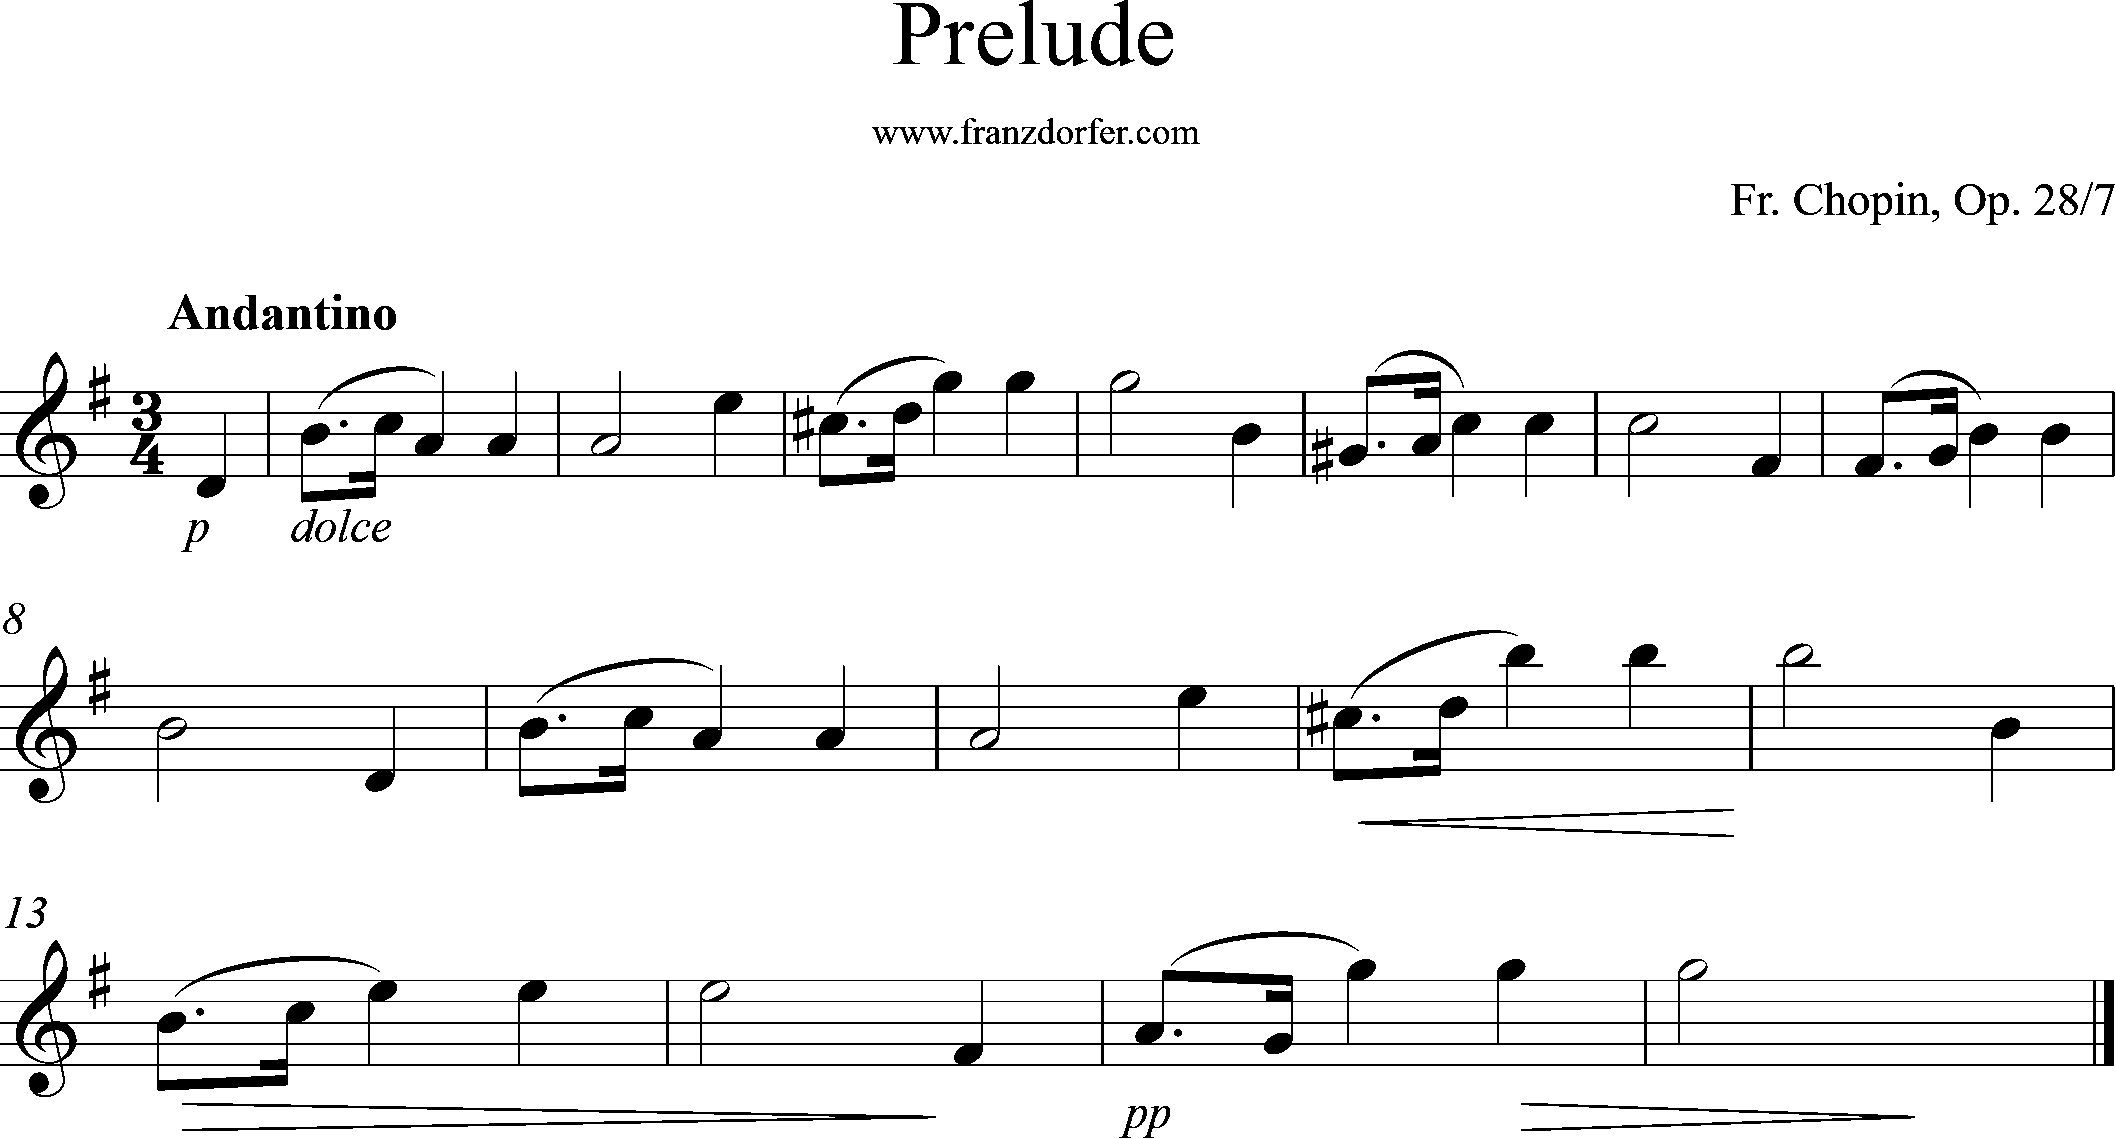 Solopart, G-Dur, Prelude Chopin